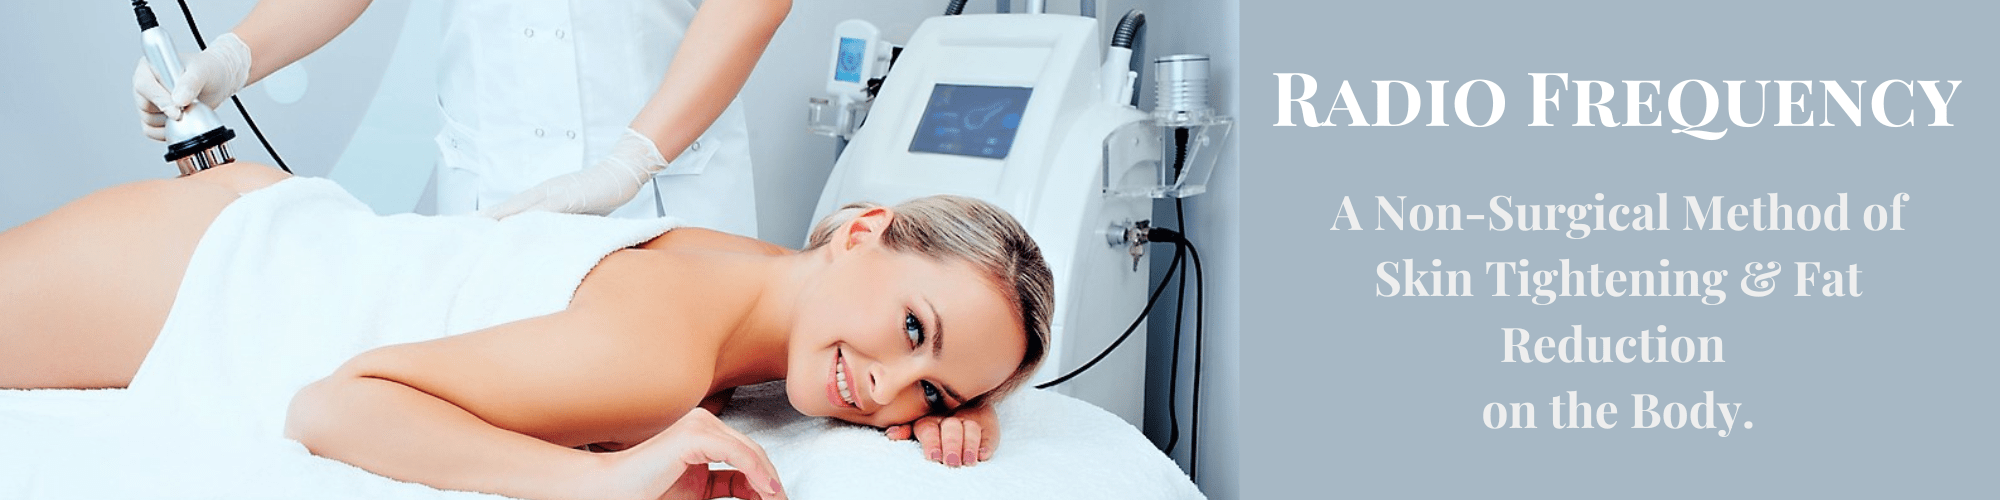 A smiling woman is getting RF skin tightening on the back of her thighs.